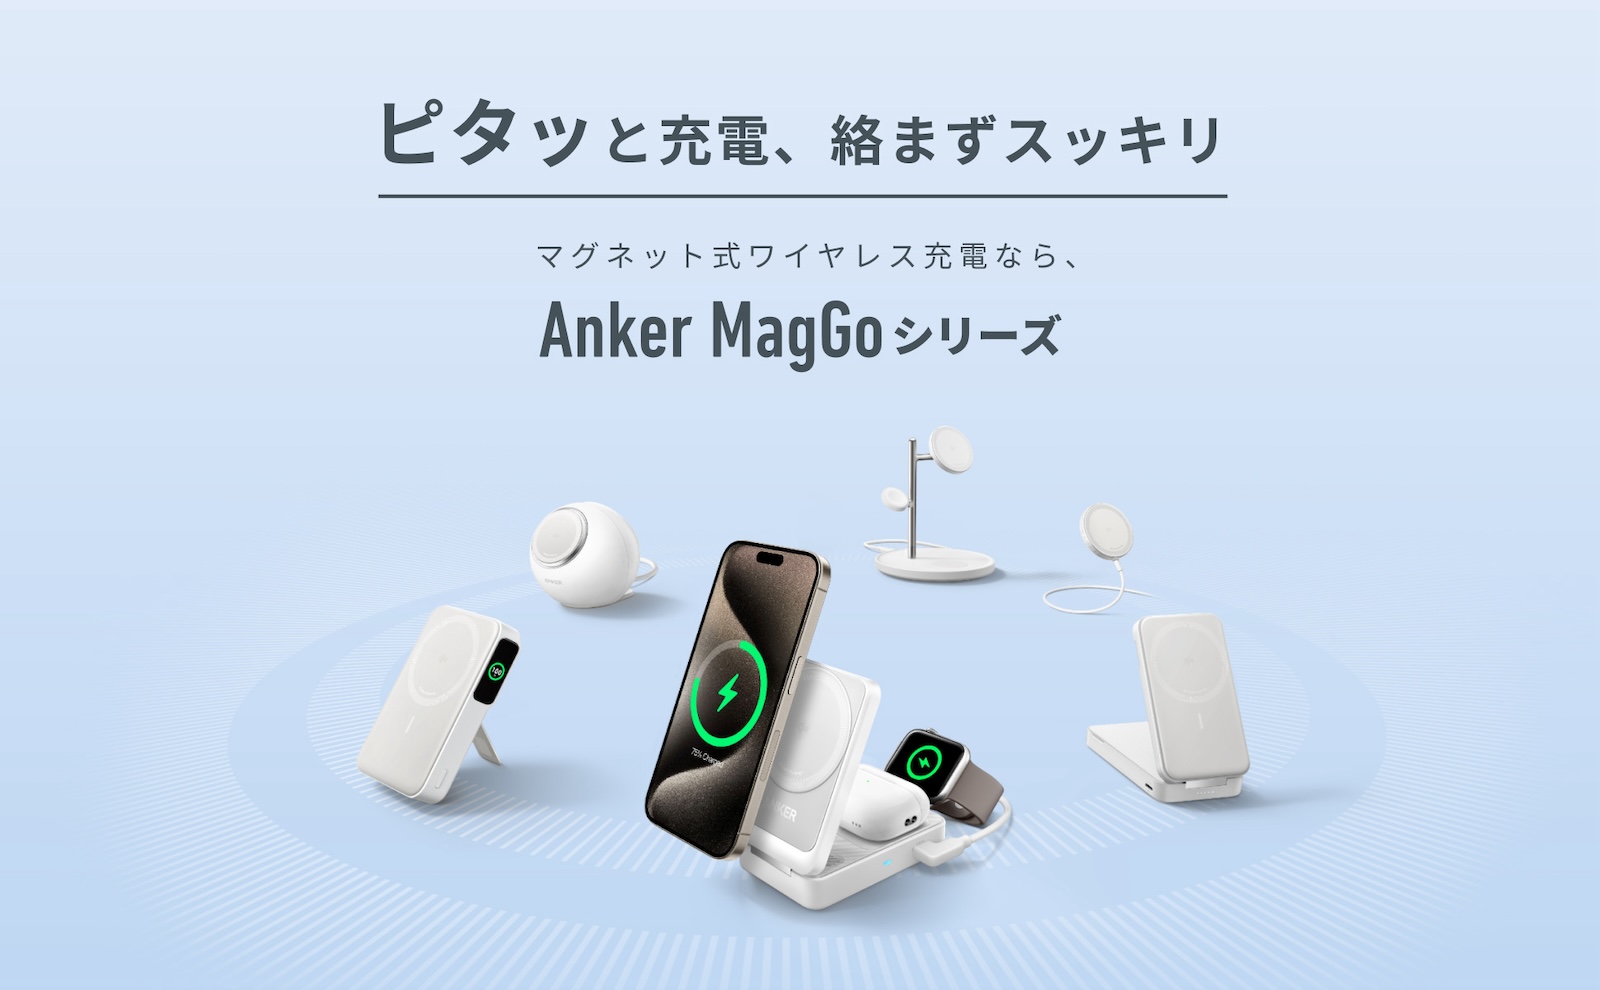 Anker Qi2 devices KeyVisual